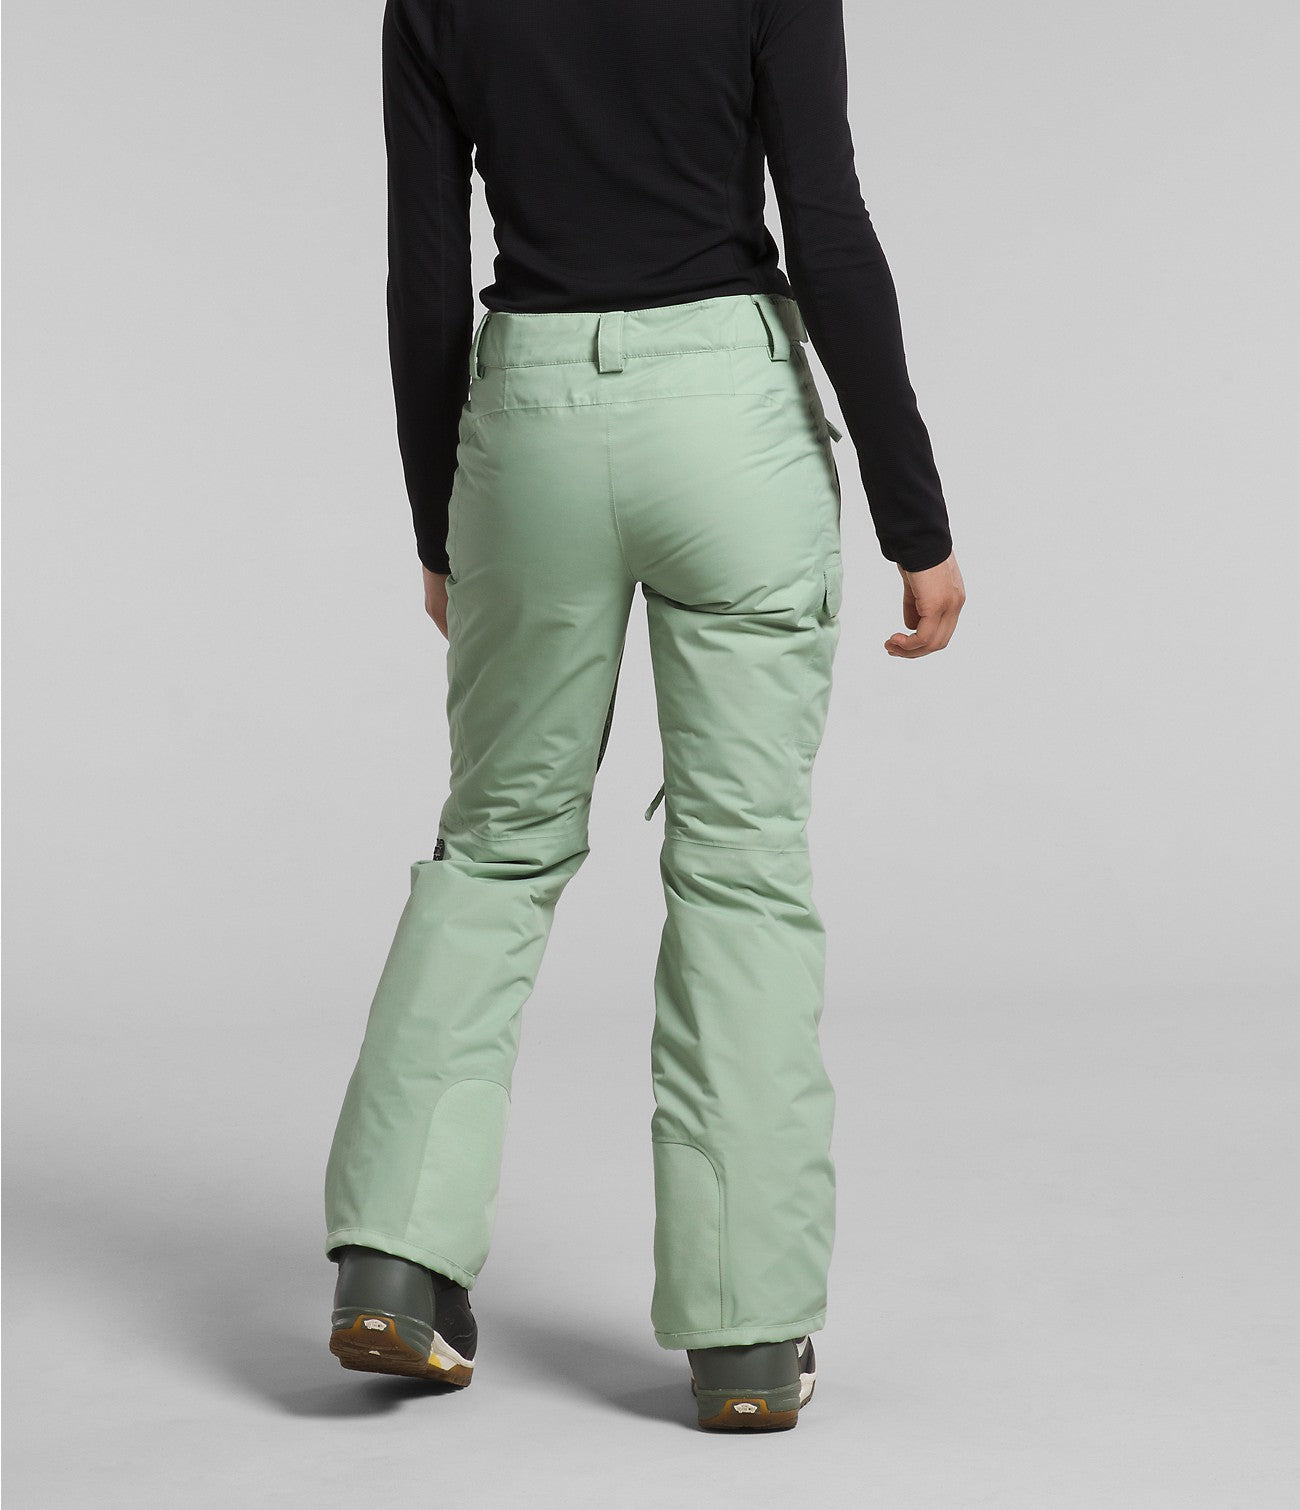 Women's Freedom Insulated Pants